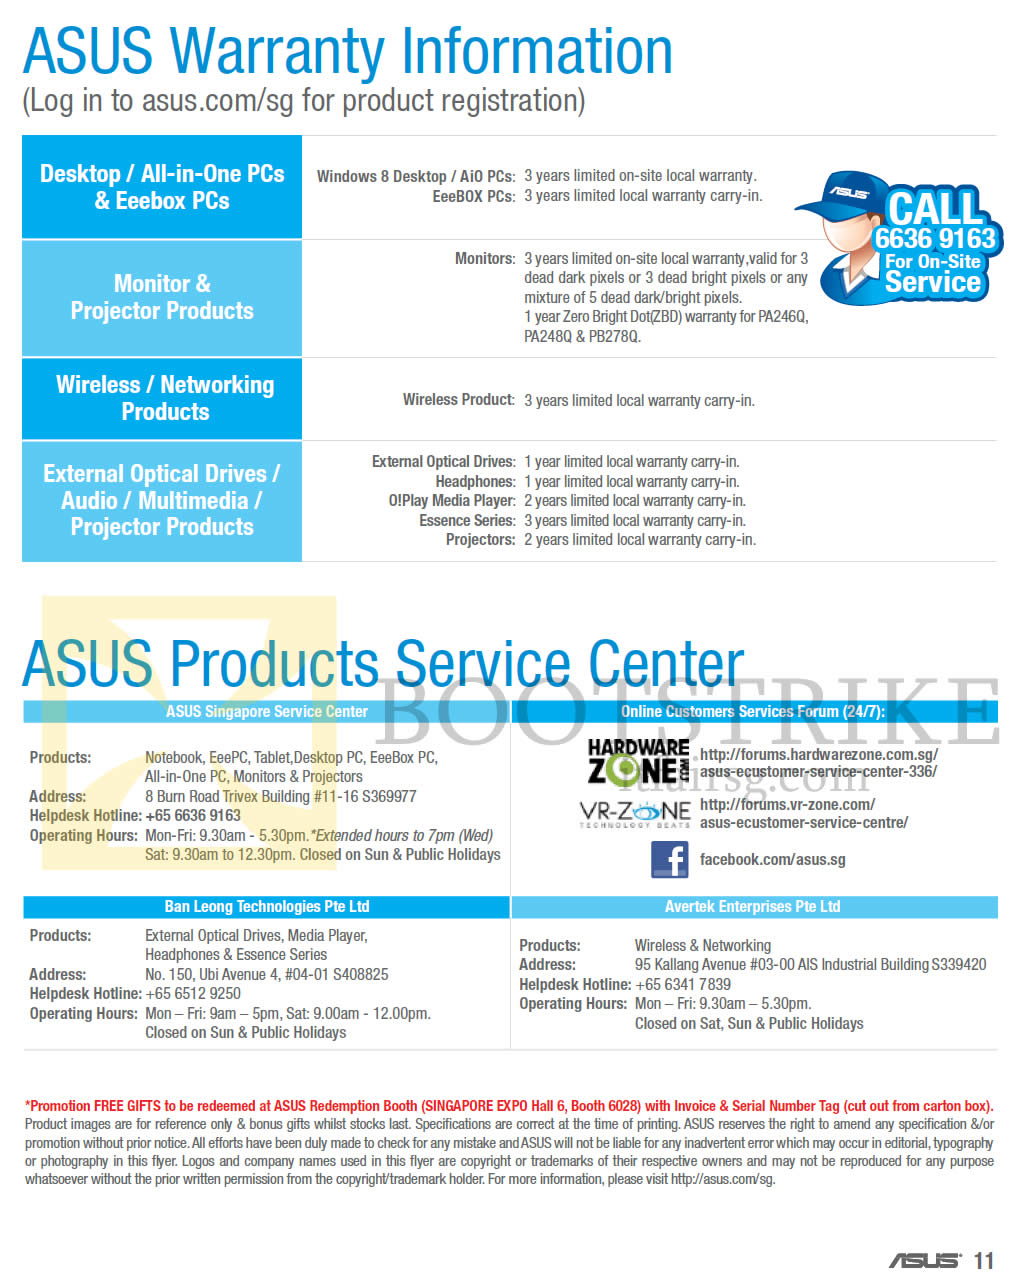 PC SHOW 2014 price list image brochure of ASUS Warranty Information, Products Service Centre